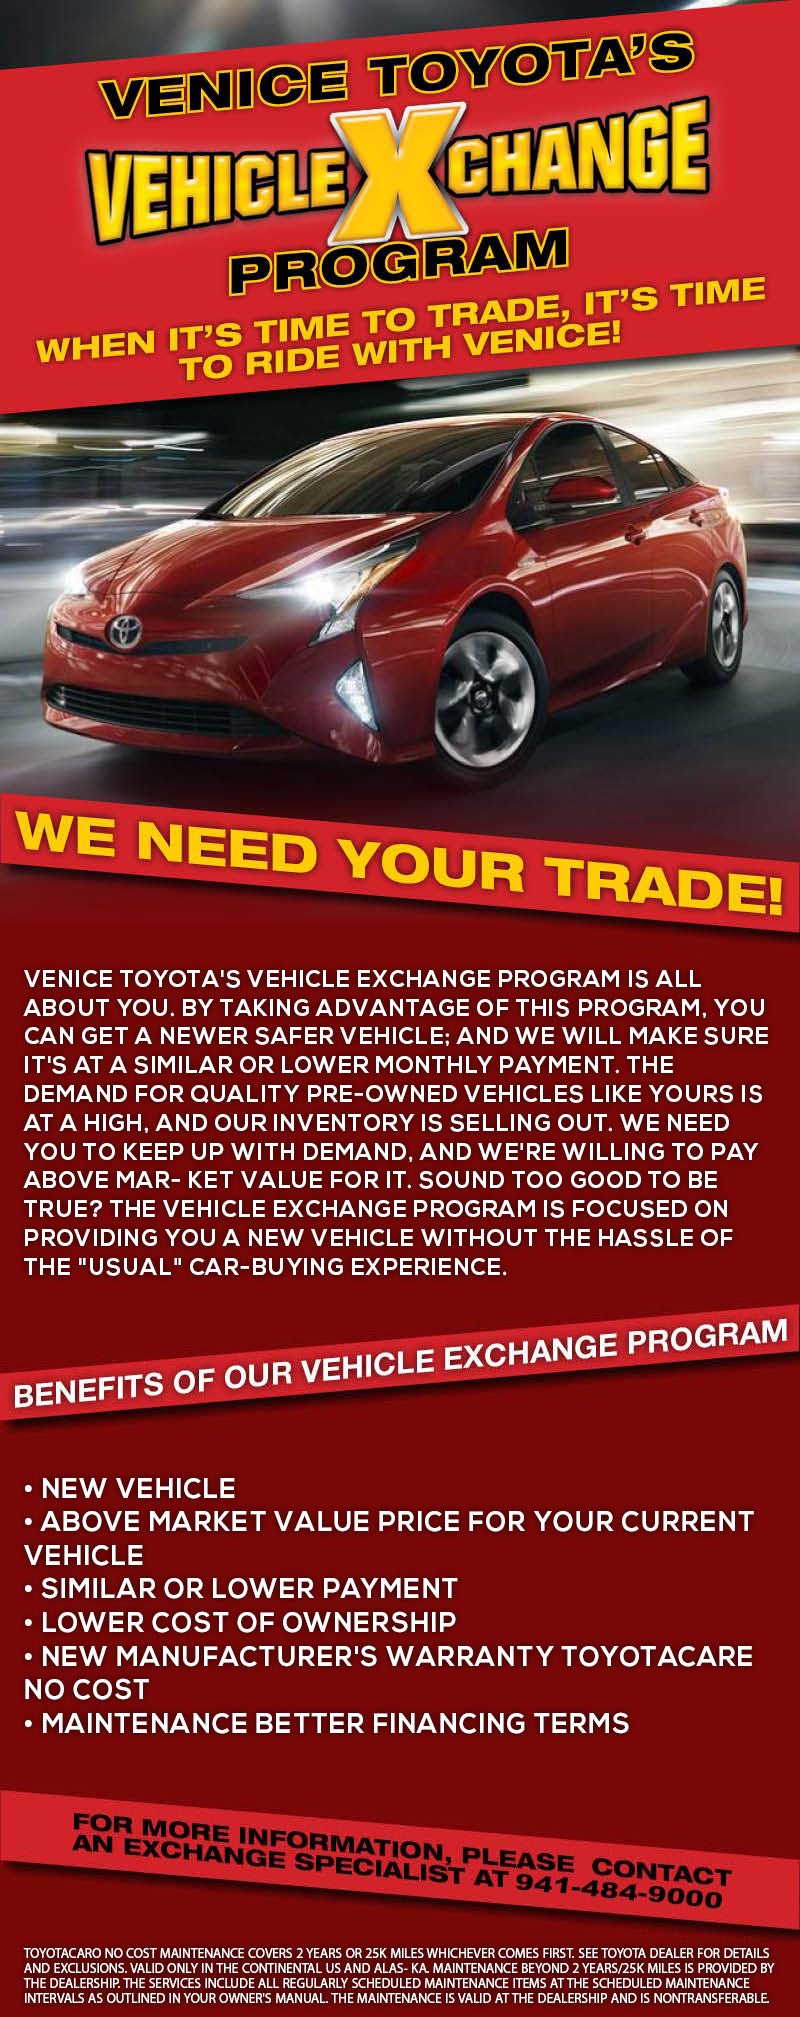 venice toyota vehicle xchange program when it's time to trade its time to ride with venice